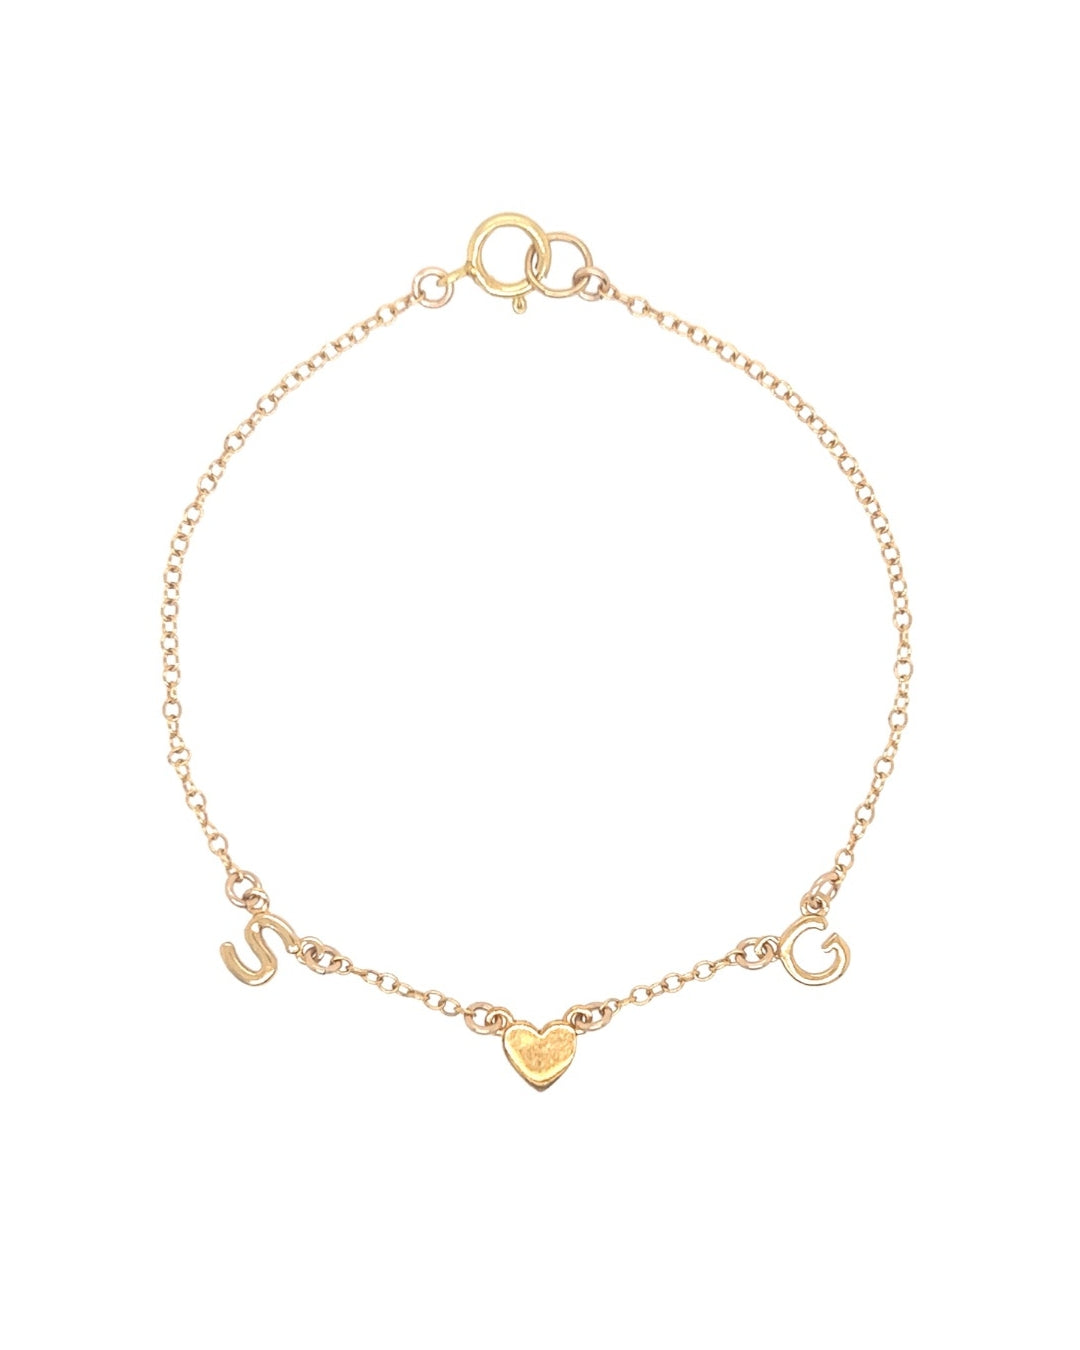 Customizable gold petite initial bracelet with the option to add up to 5 letters, gems or heart